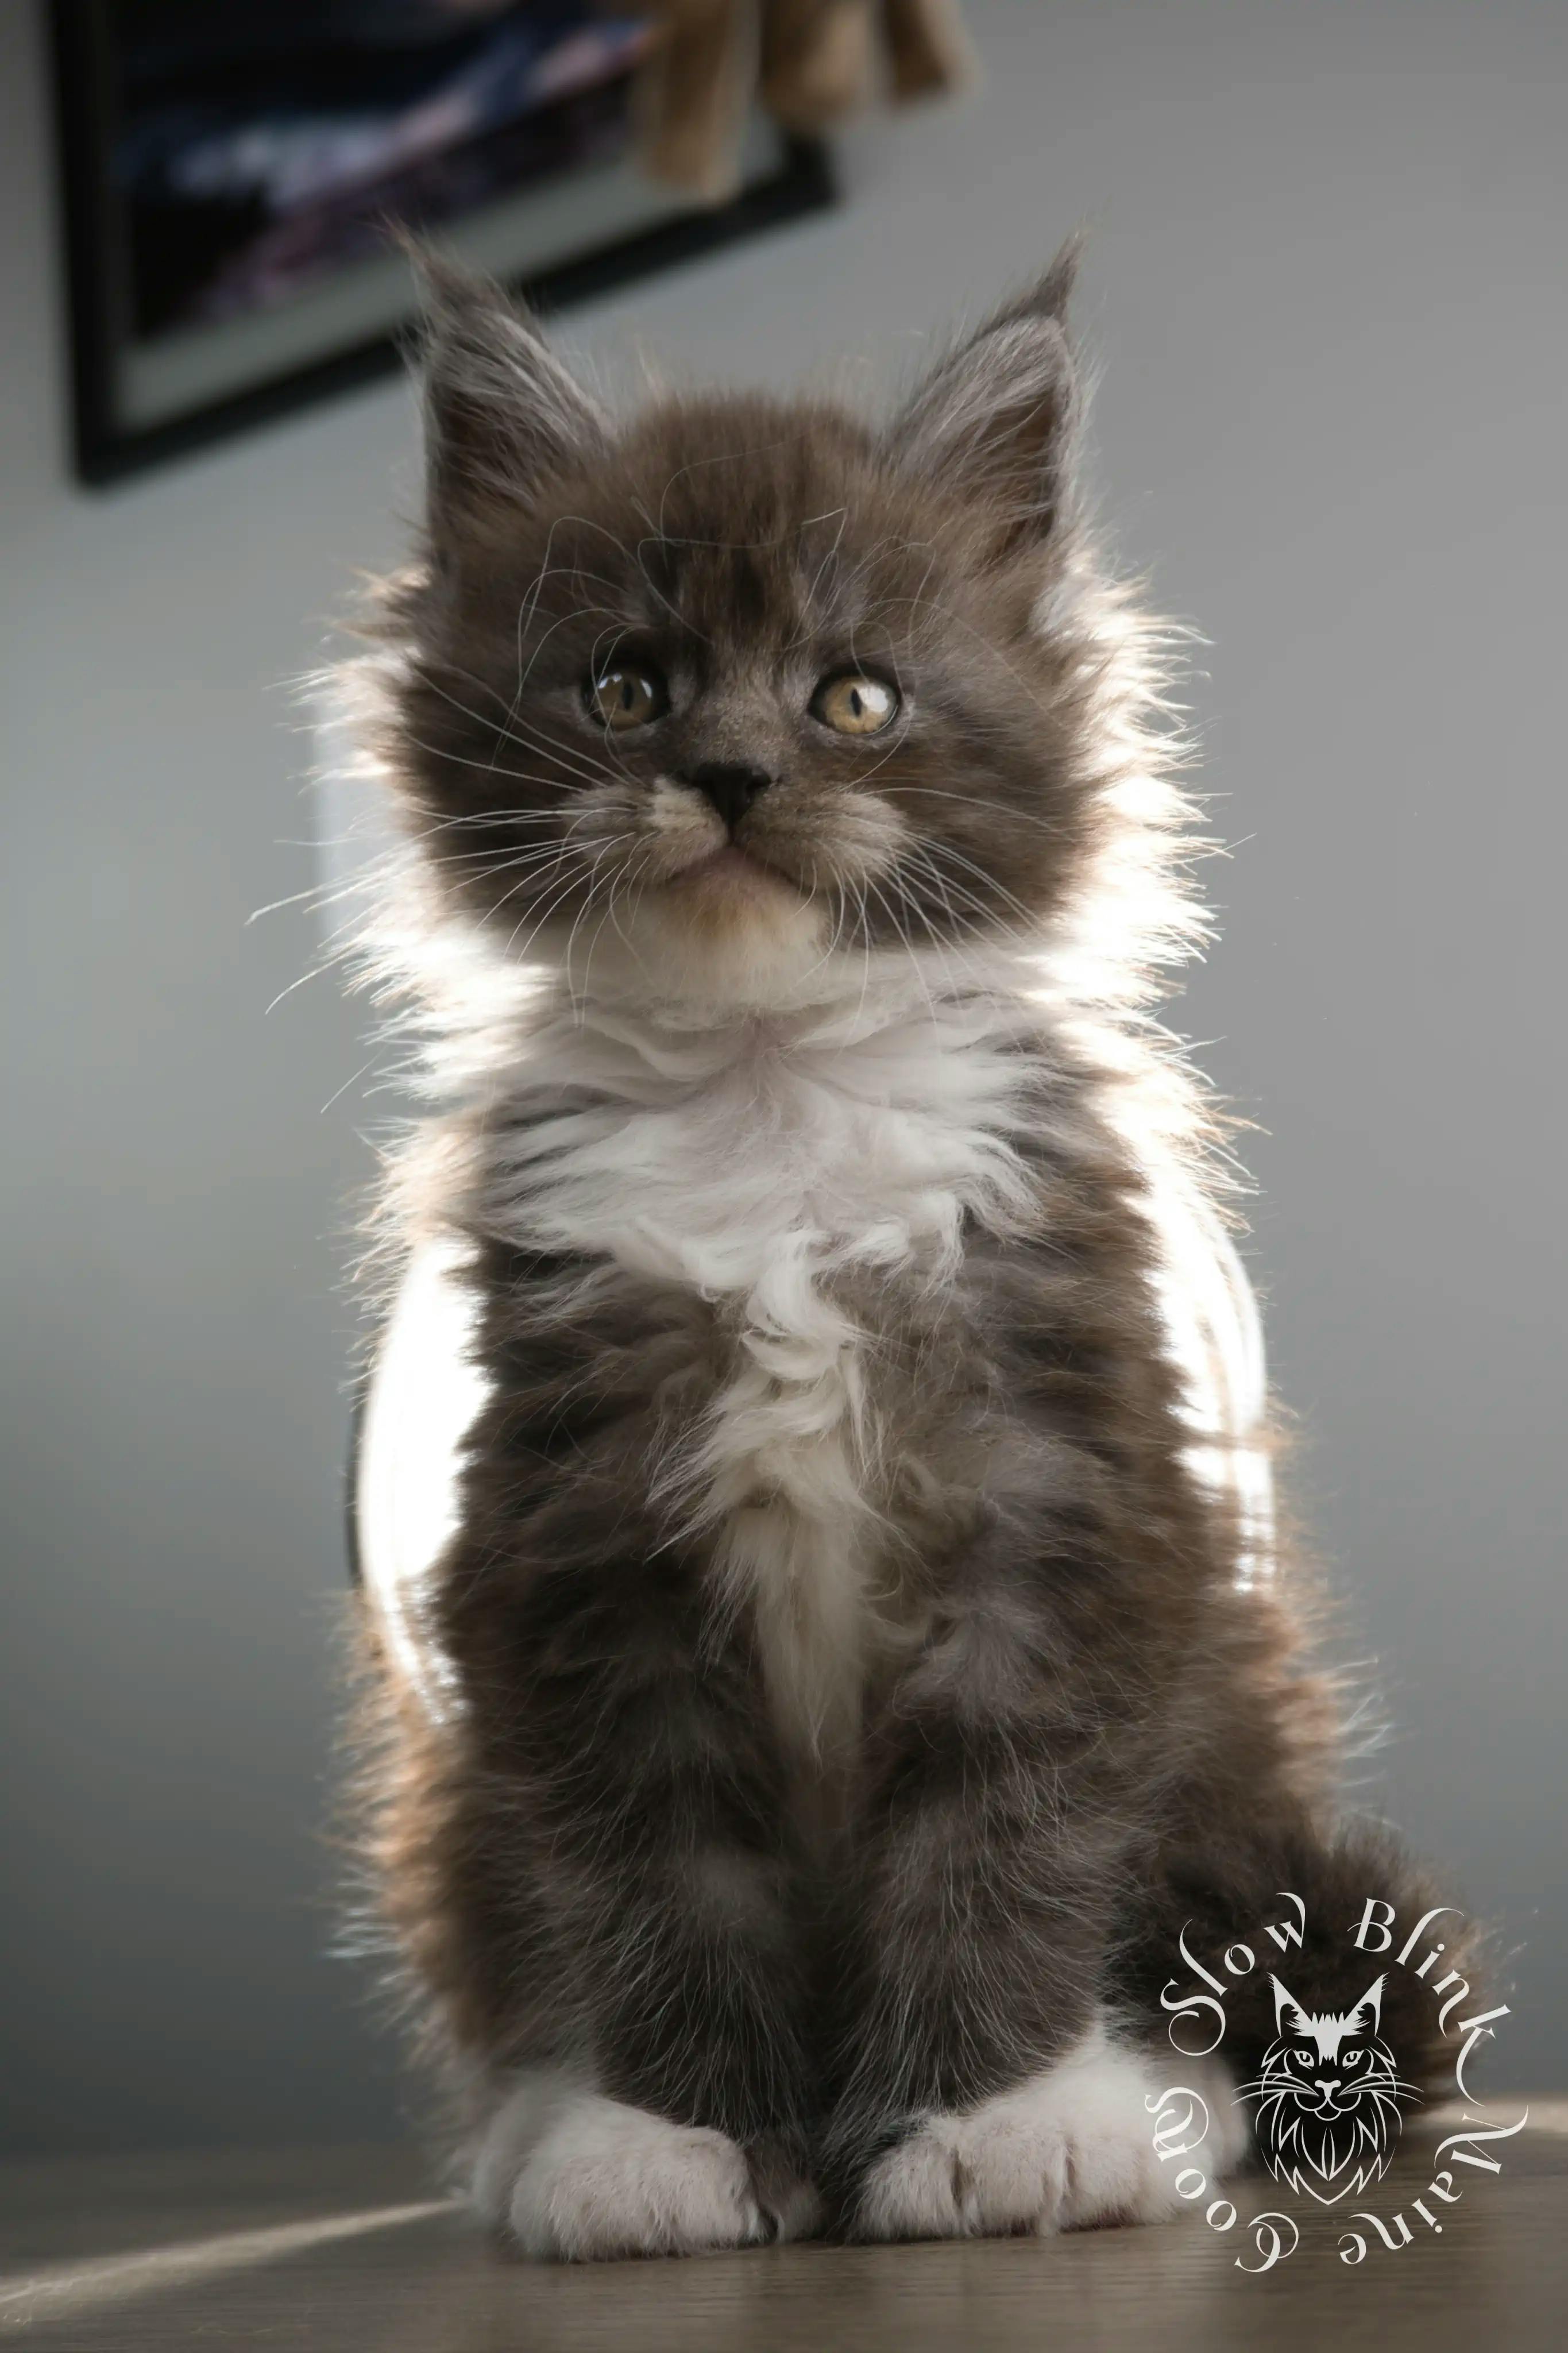 Bicolor Maine Coon Kittens > bicolor maine coon kitten | slowblinkmainecoons | ems code ns as 03 09 | 02 | 163